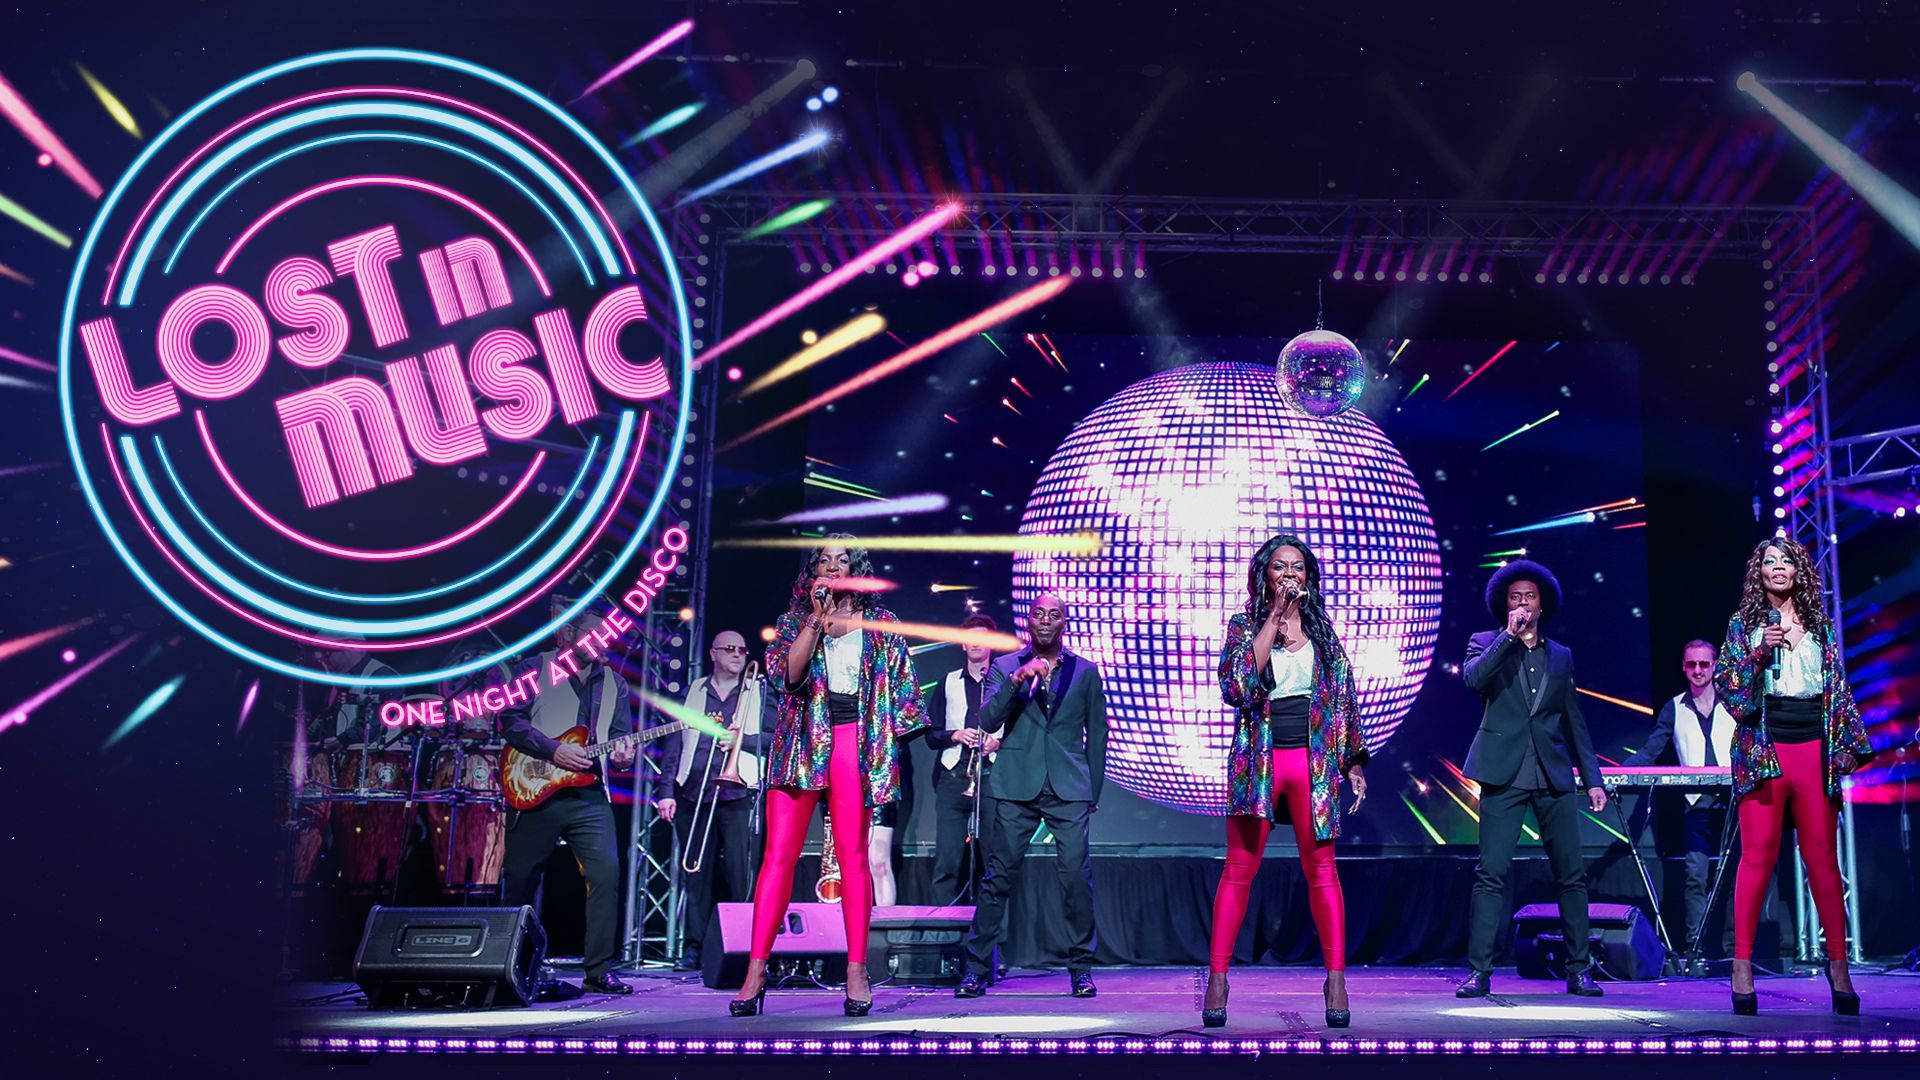 Large disco ball sits behind group male and female singers holding microphones and looking straight ahead